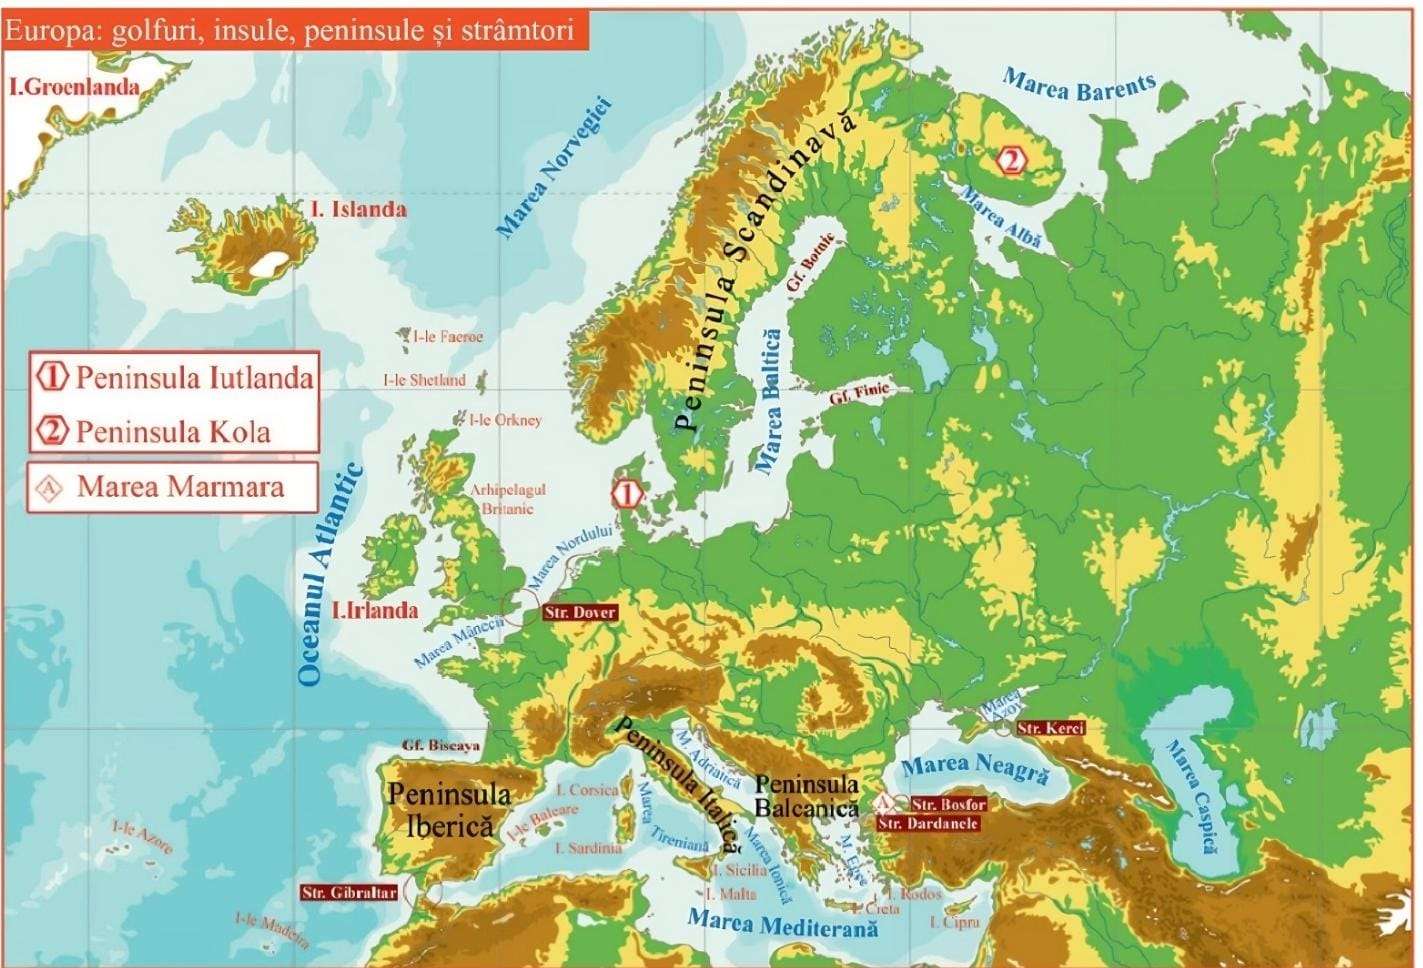 Europe/geographic location jigsaw puzzle online